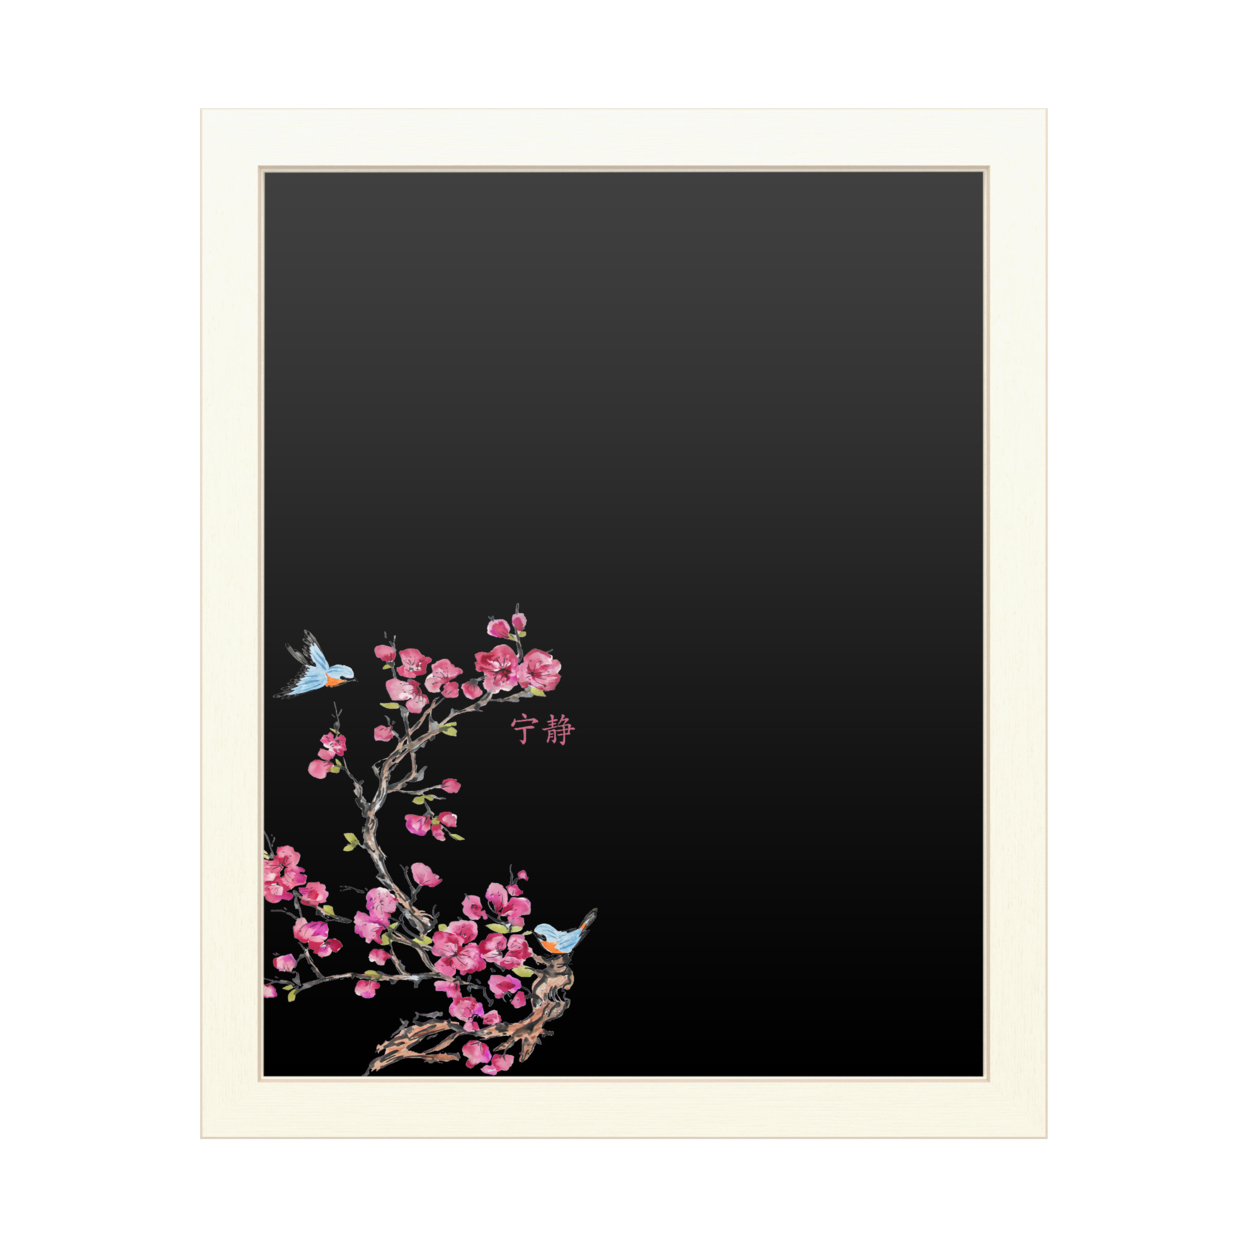 16 X 20 Chalk Board With Printed Artwork - Jean Plout Cherry Blossom Serenity Birds White Board - Ready To Hang Chalkboard